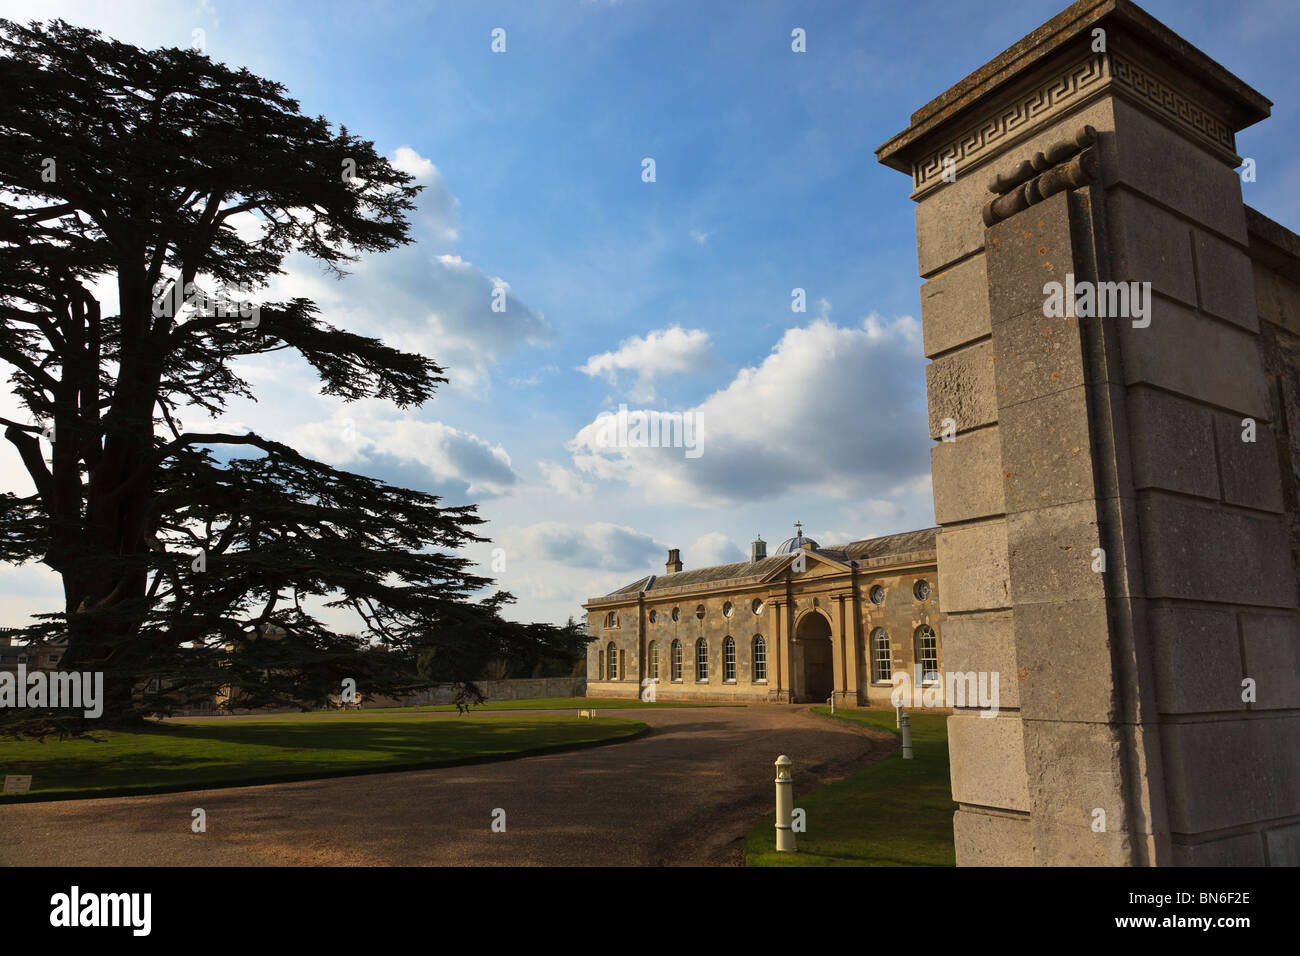 The North Court, Woburn Abbey, Bedfordshire, England Stock Photo